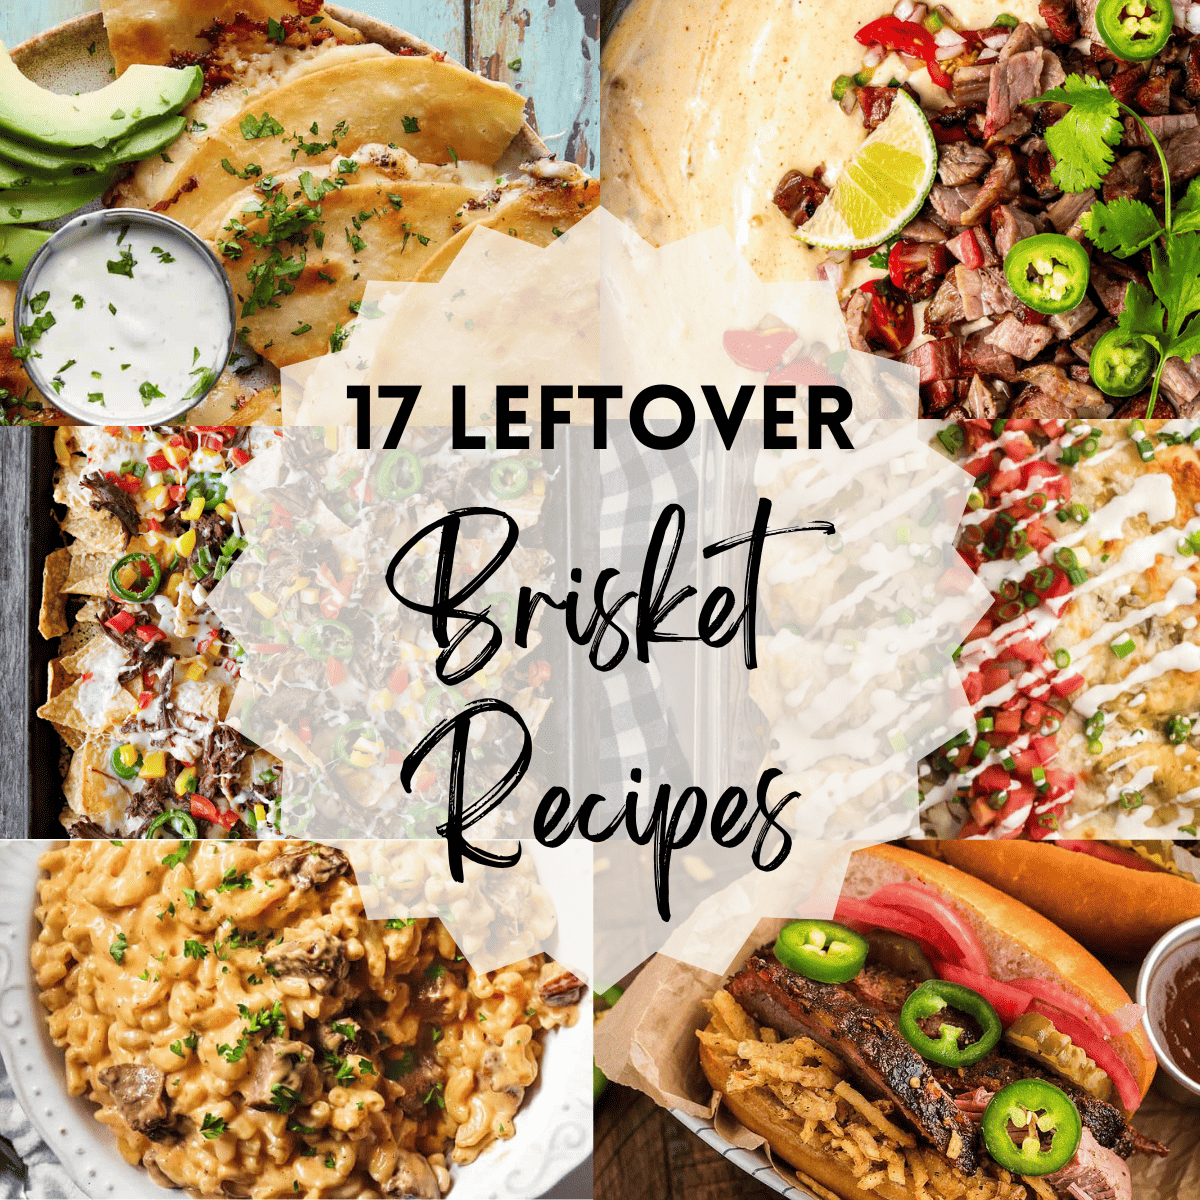 A 6 photo collage of brisket recipes with text overlay that says '17 leftover brisket recipes'. 